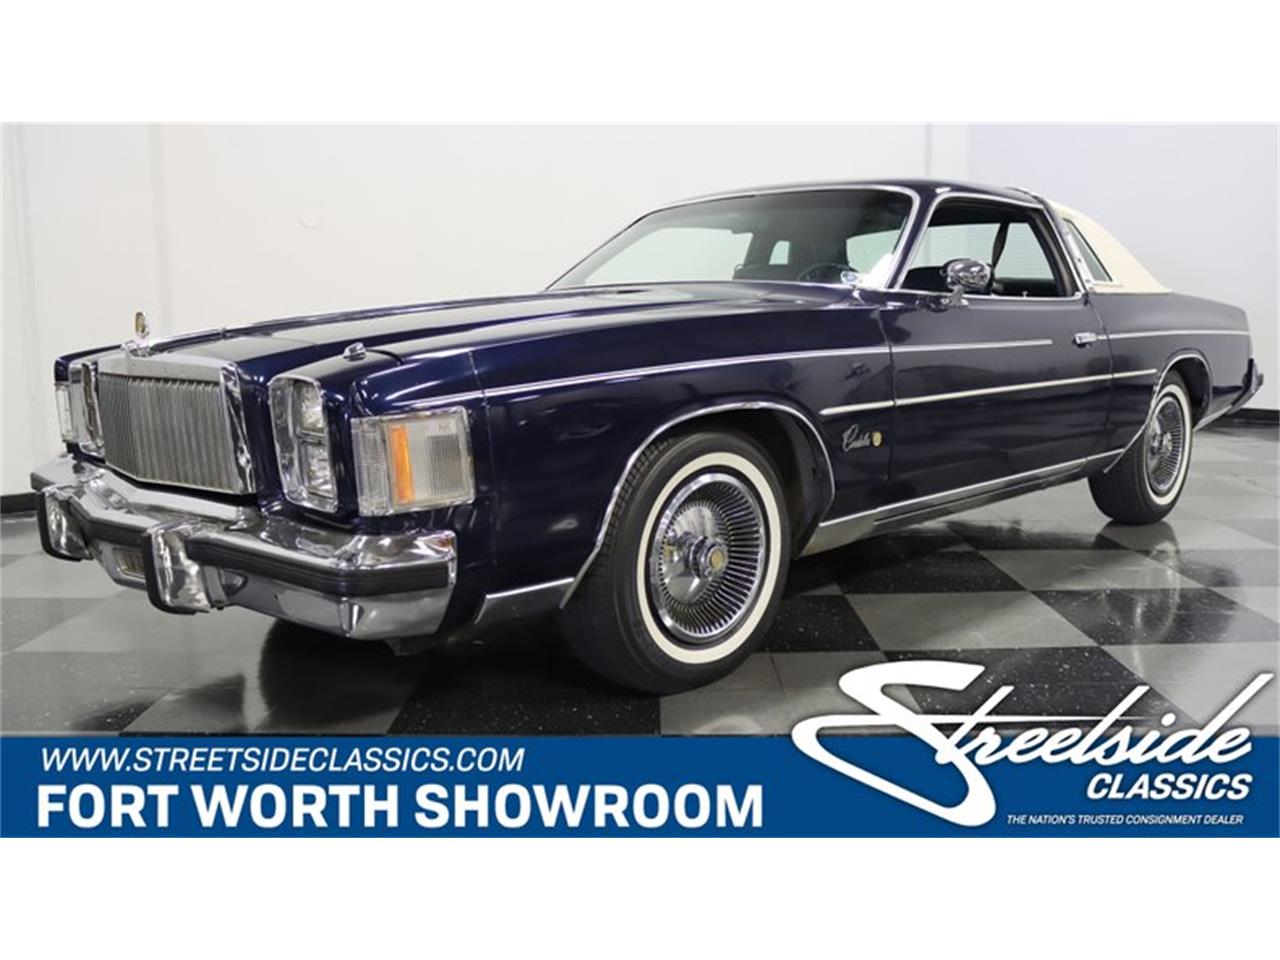 1979 Chrysler Cordoba for sale in Fort Worth, TX